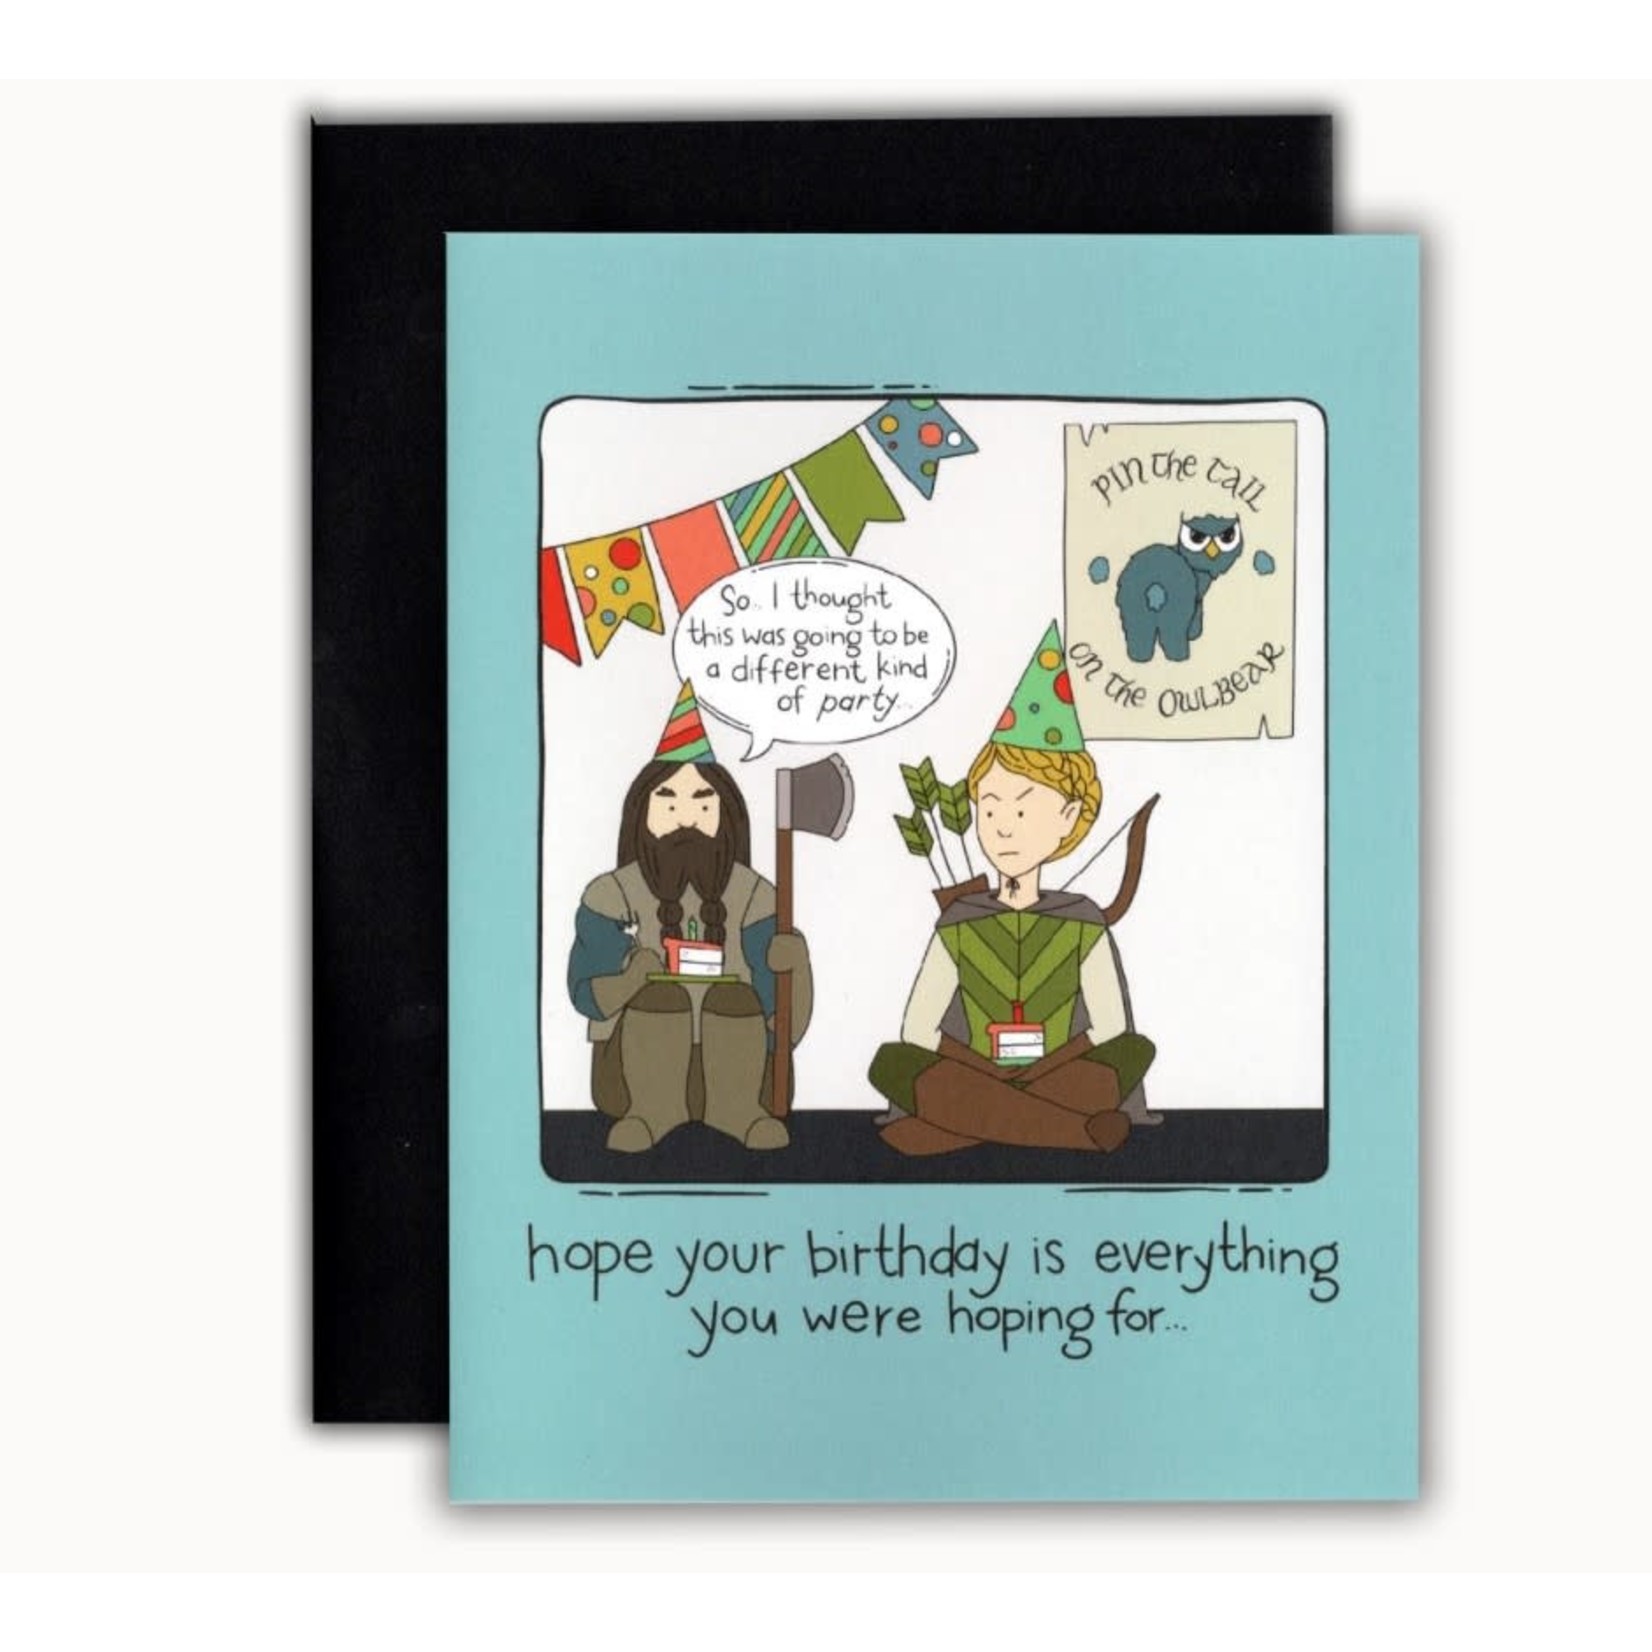 Storymakers Trading Co Blank Greeting Card: A Different Kind of Party